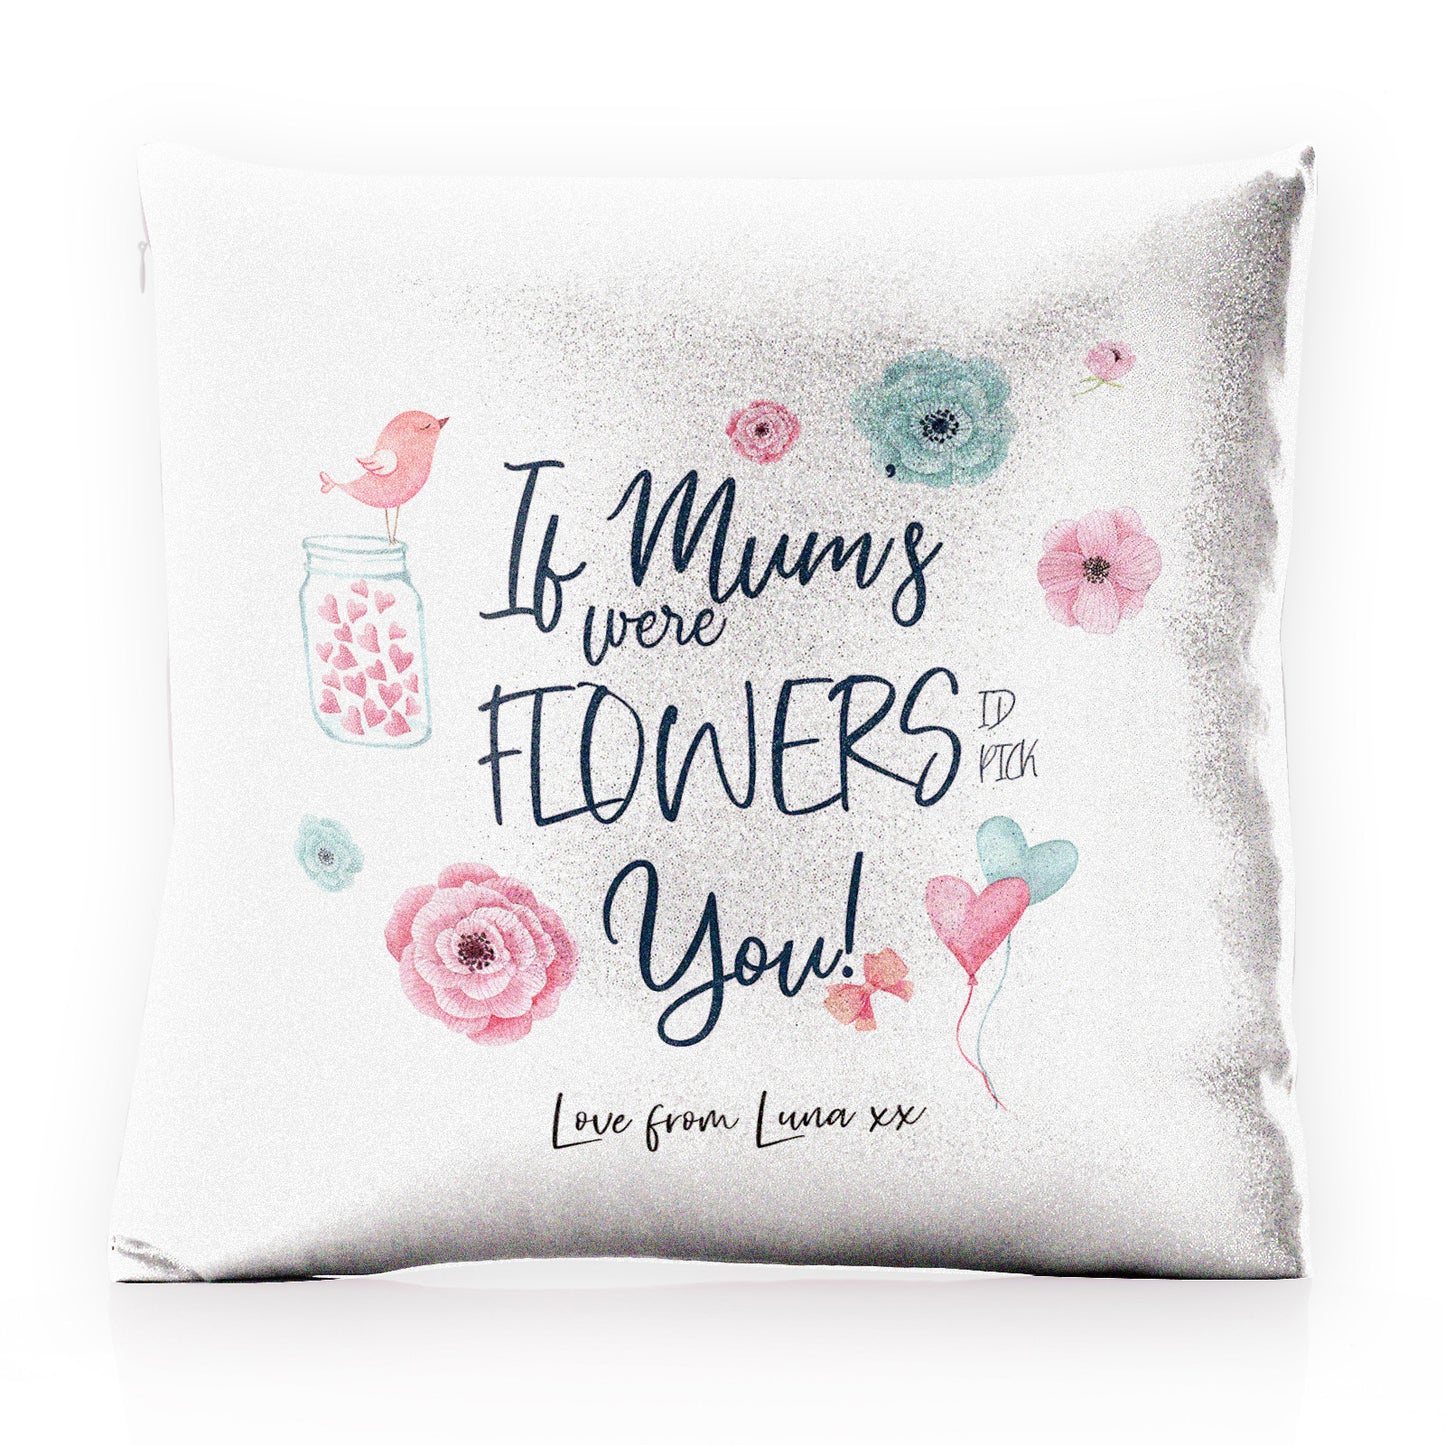 Personalised Glitter Cushion with Stylish Text and Flowers Love Message